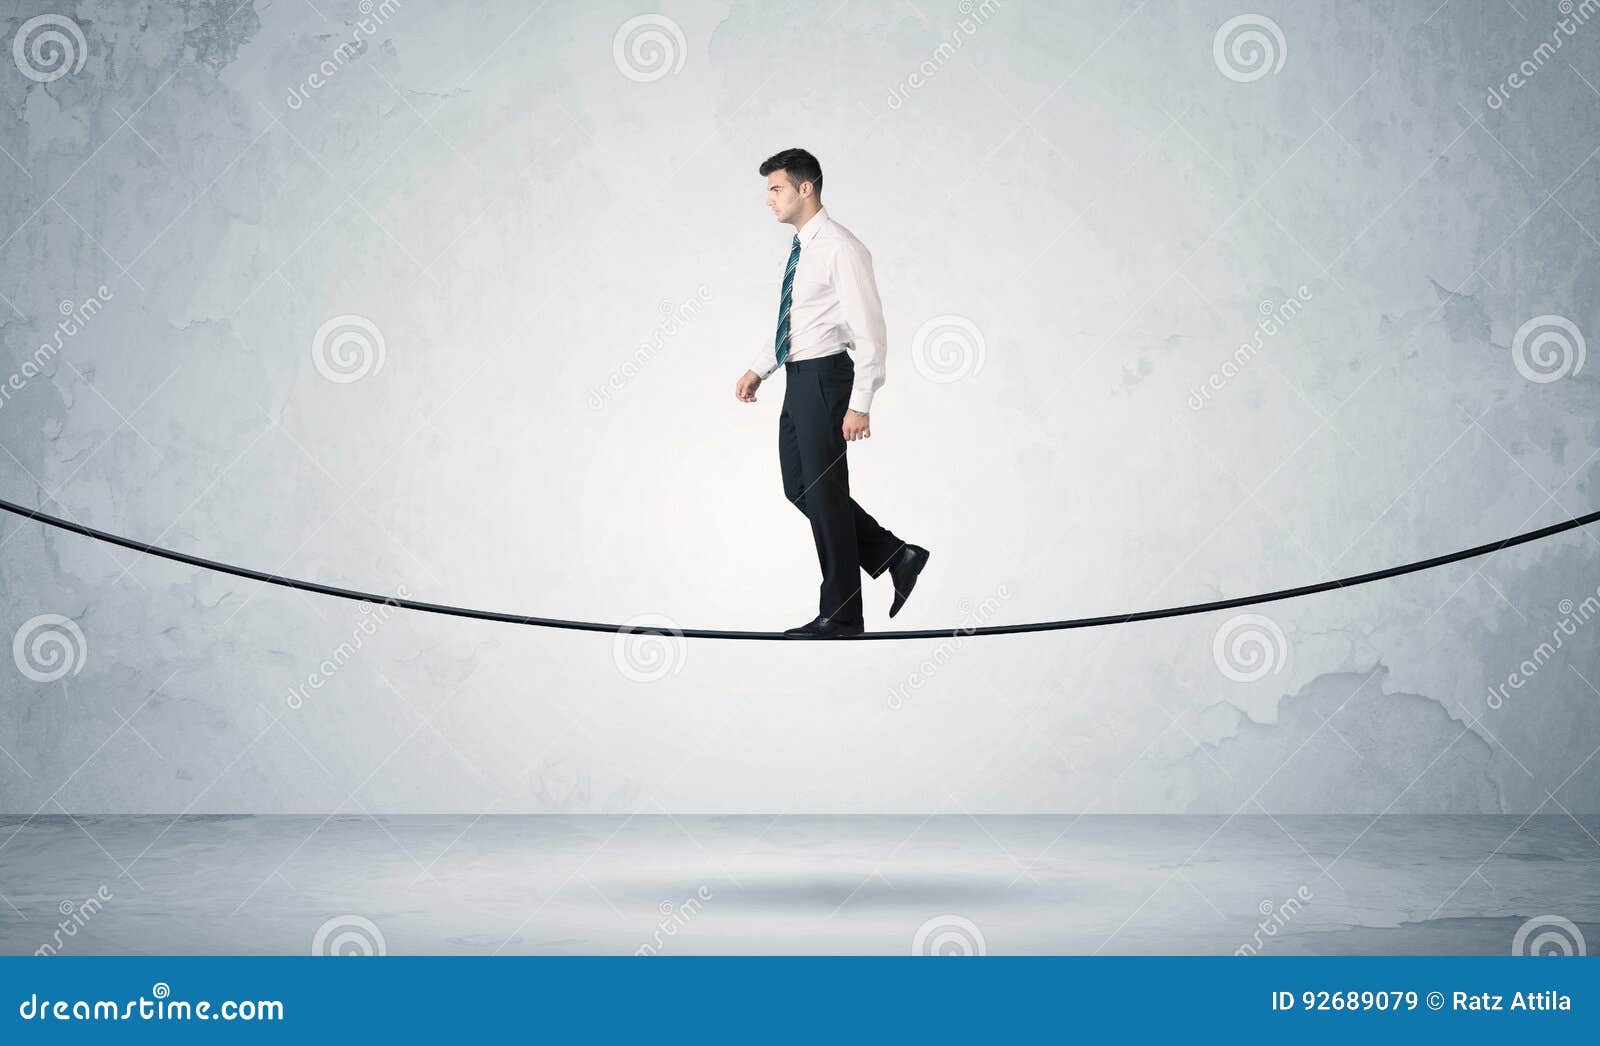 Sales Guy Balancing on Tight Rope Stock Illustration - Illustration of  rope, challenge: 92689079